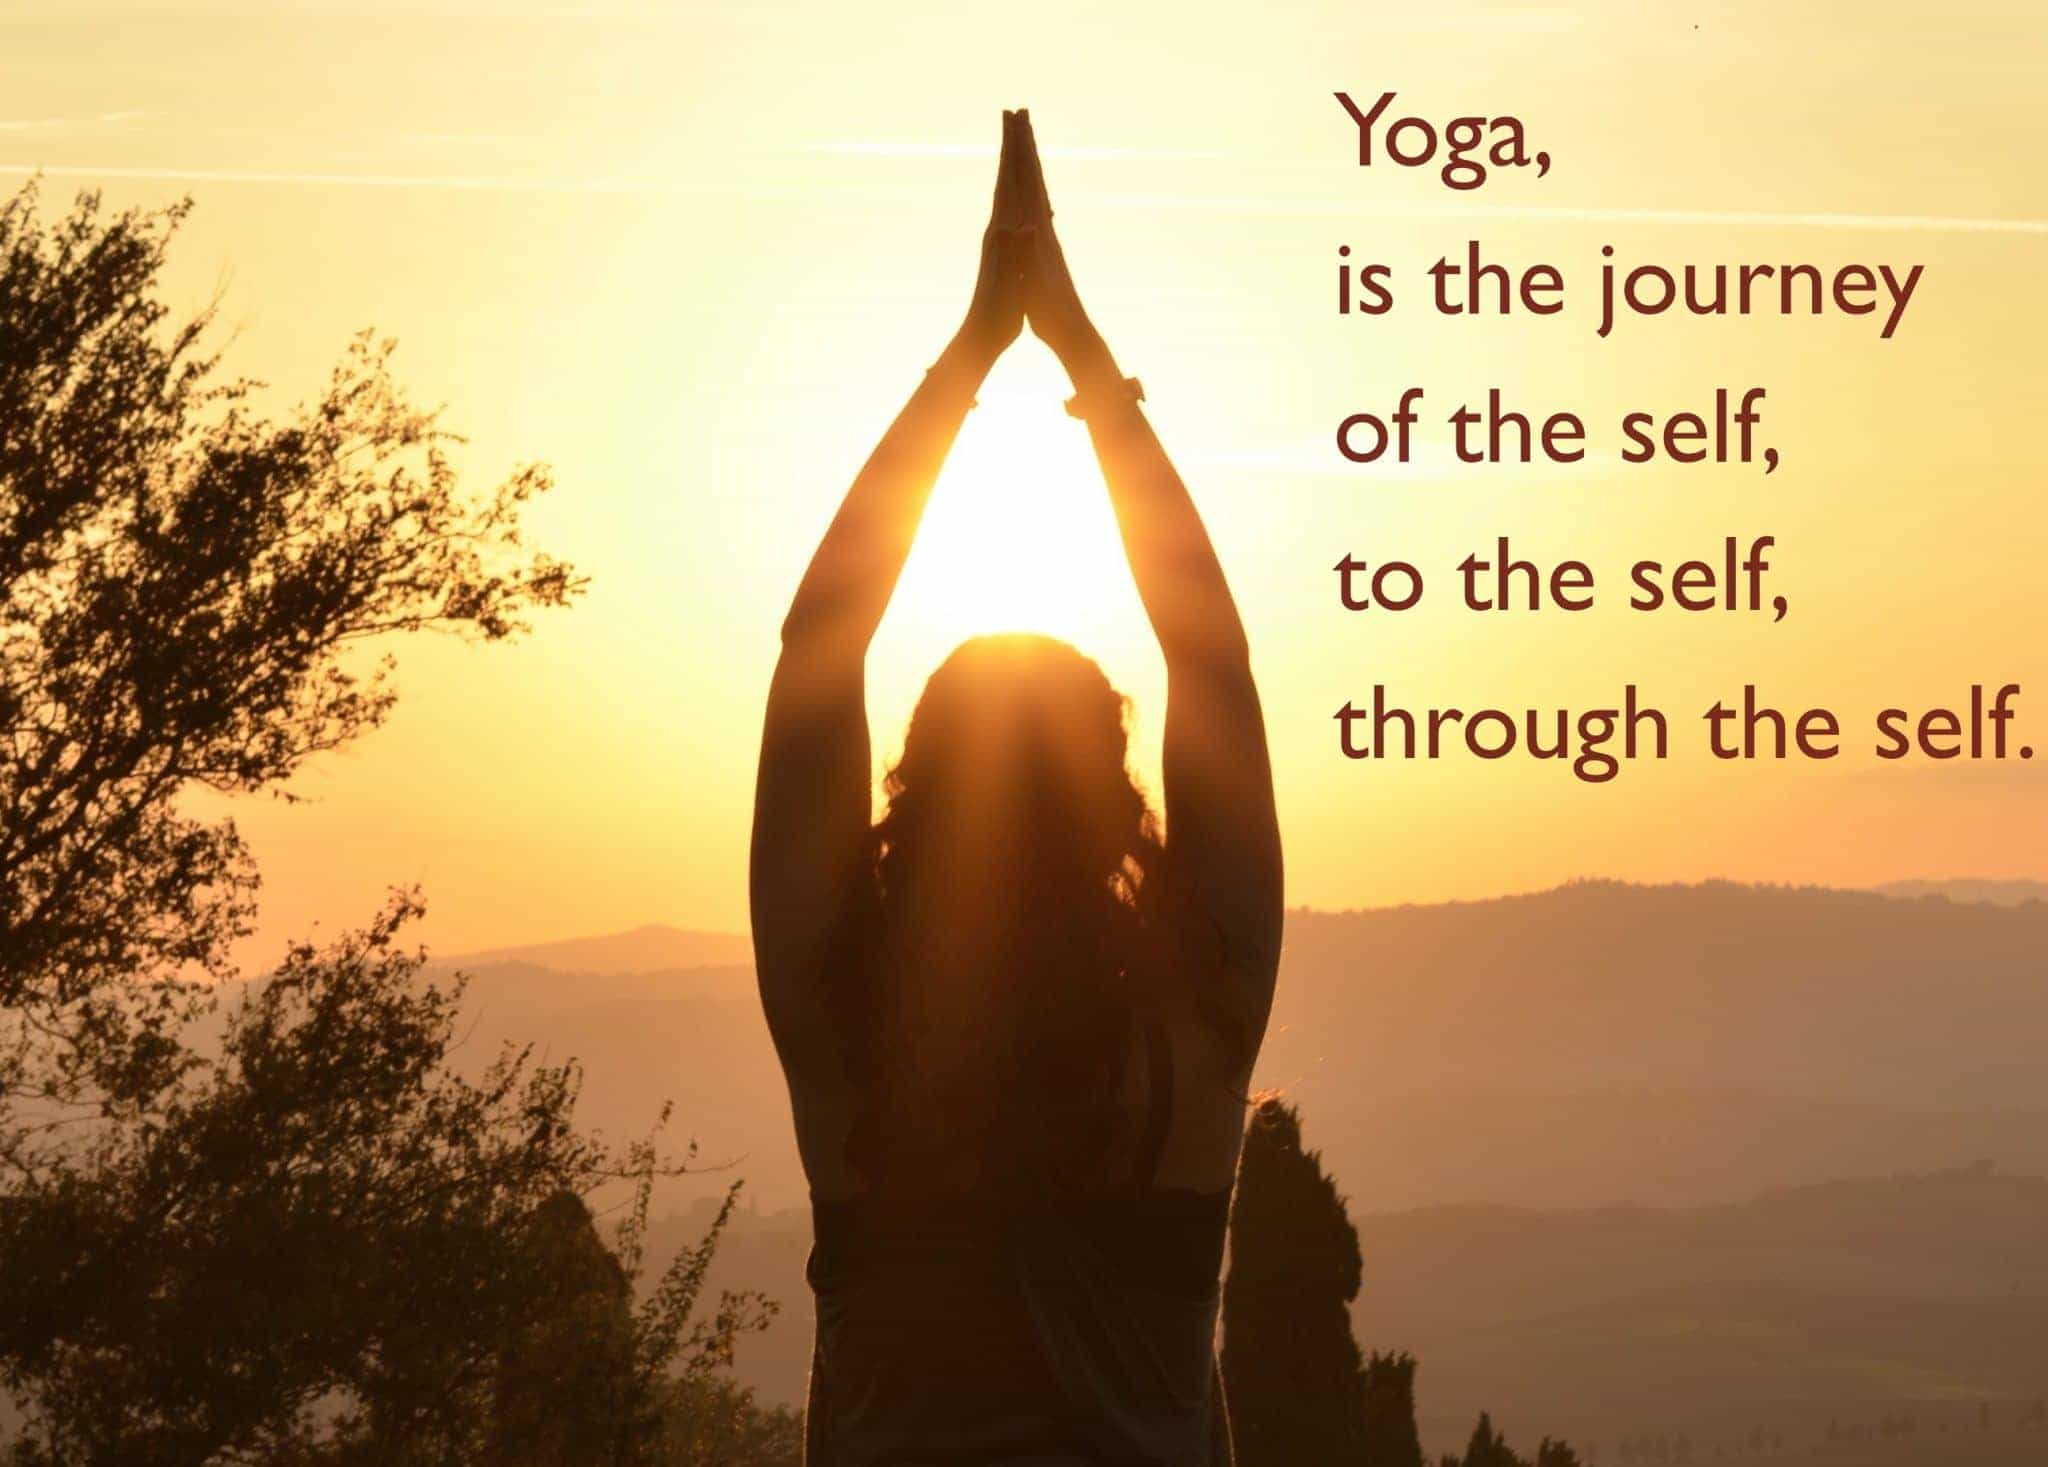 Inspirational Yoga Quote of the day 2016 - Todayz News
